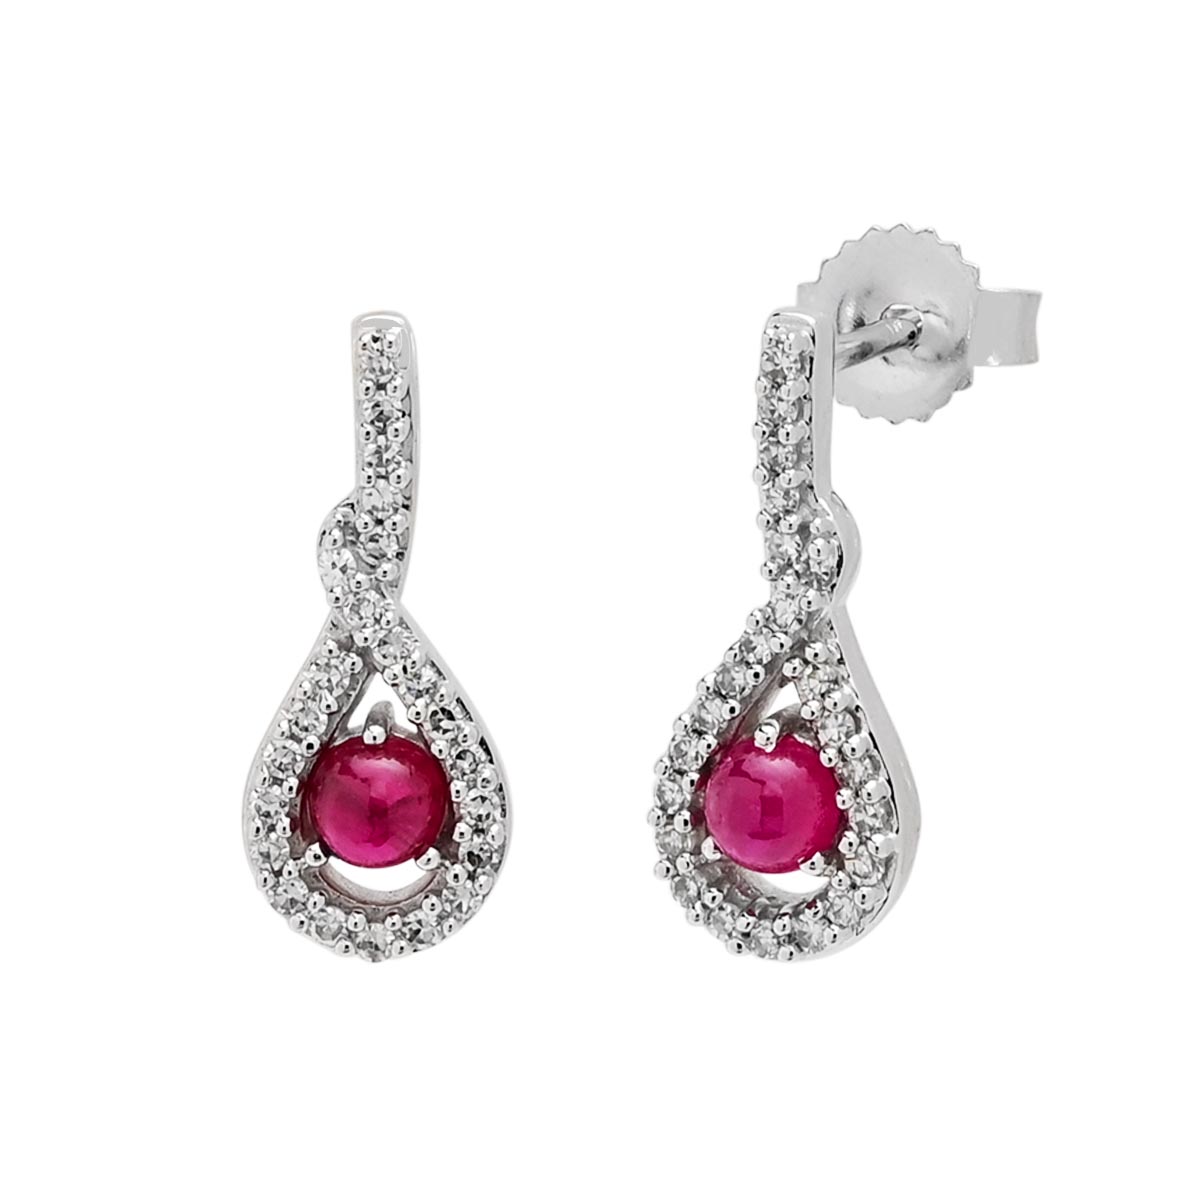 Greenland Ruby Earrings in 10kt White Gold with Diamonds (1/7ct tw)